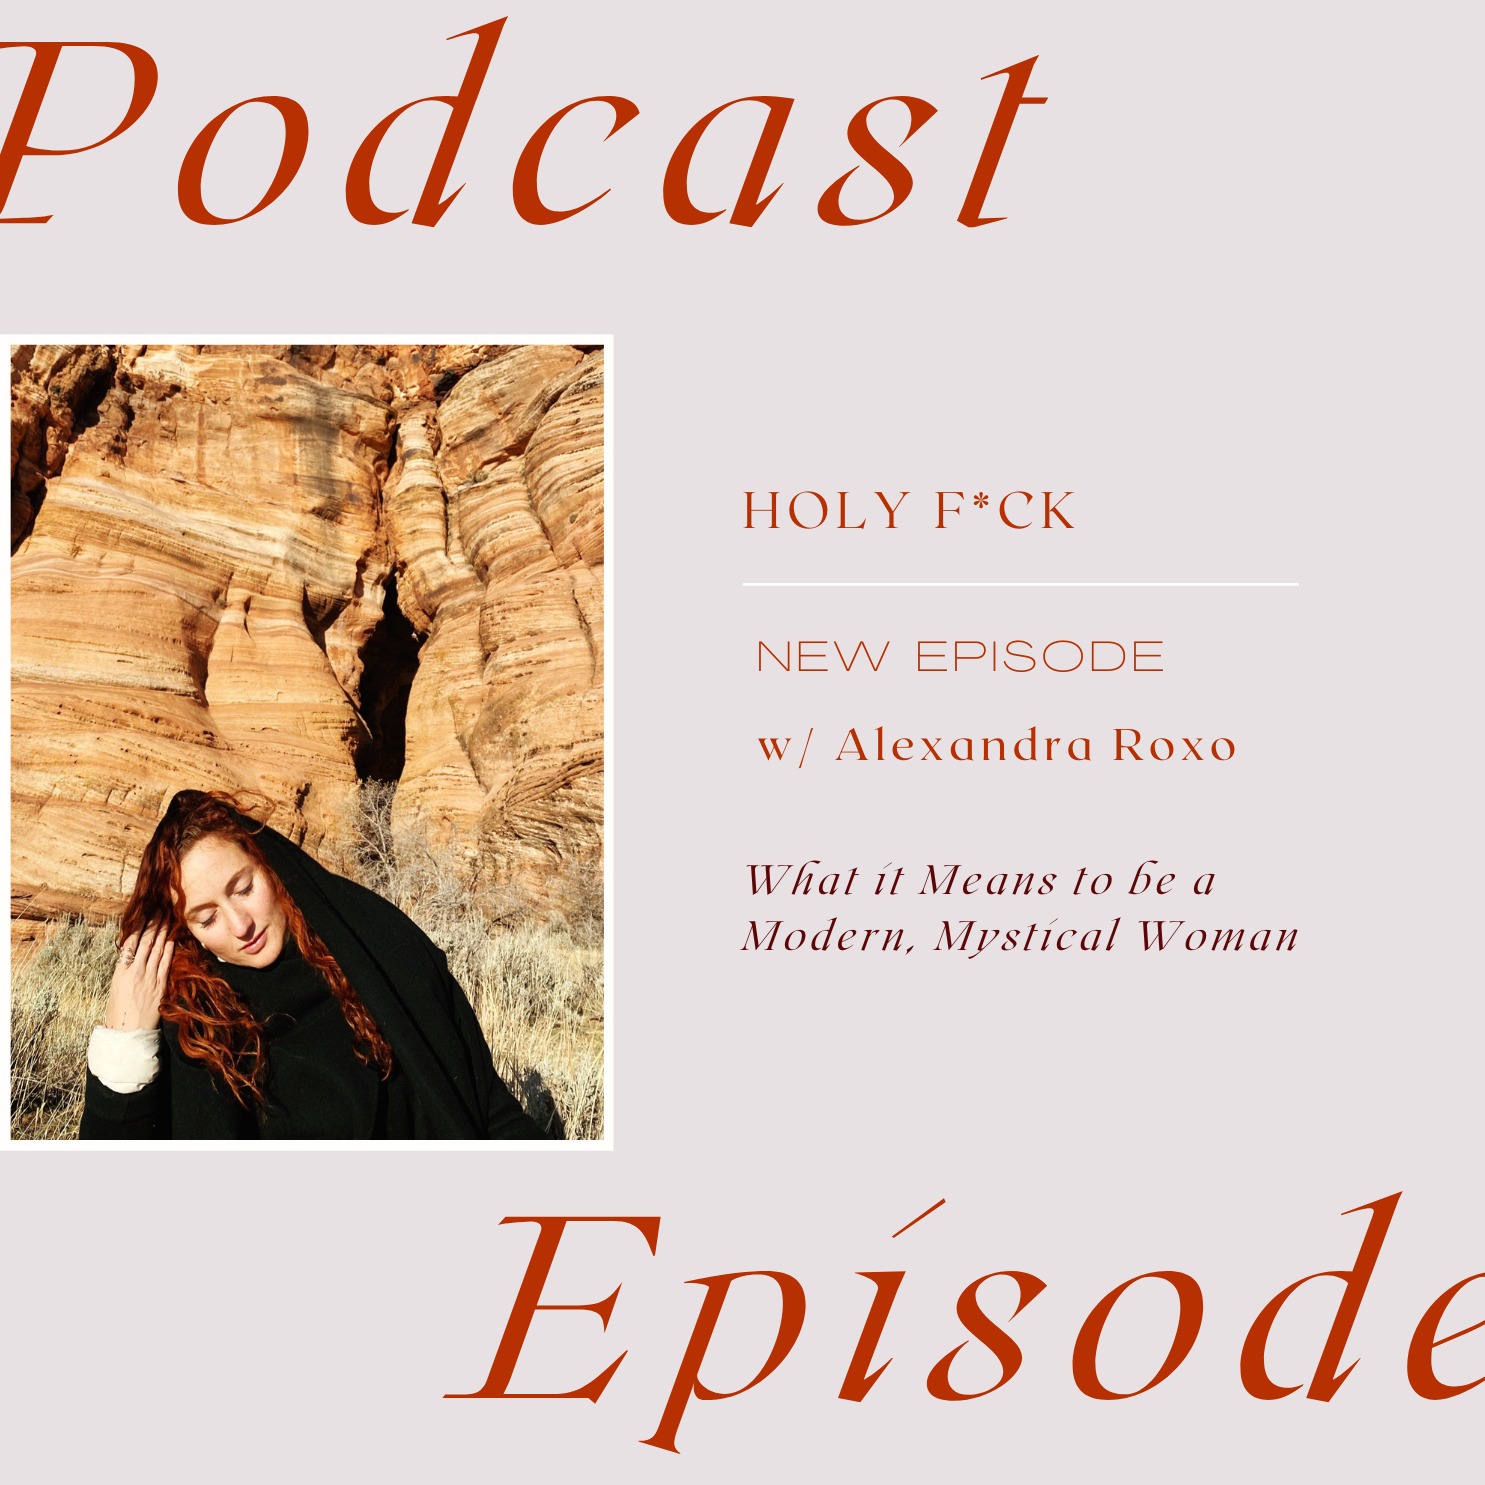 What it Means to be a Modern, Mystical Woman with Alexandra Roxo